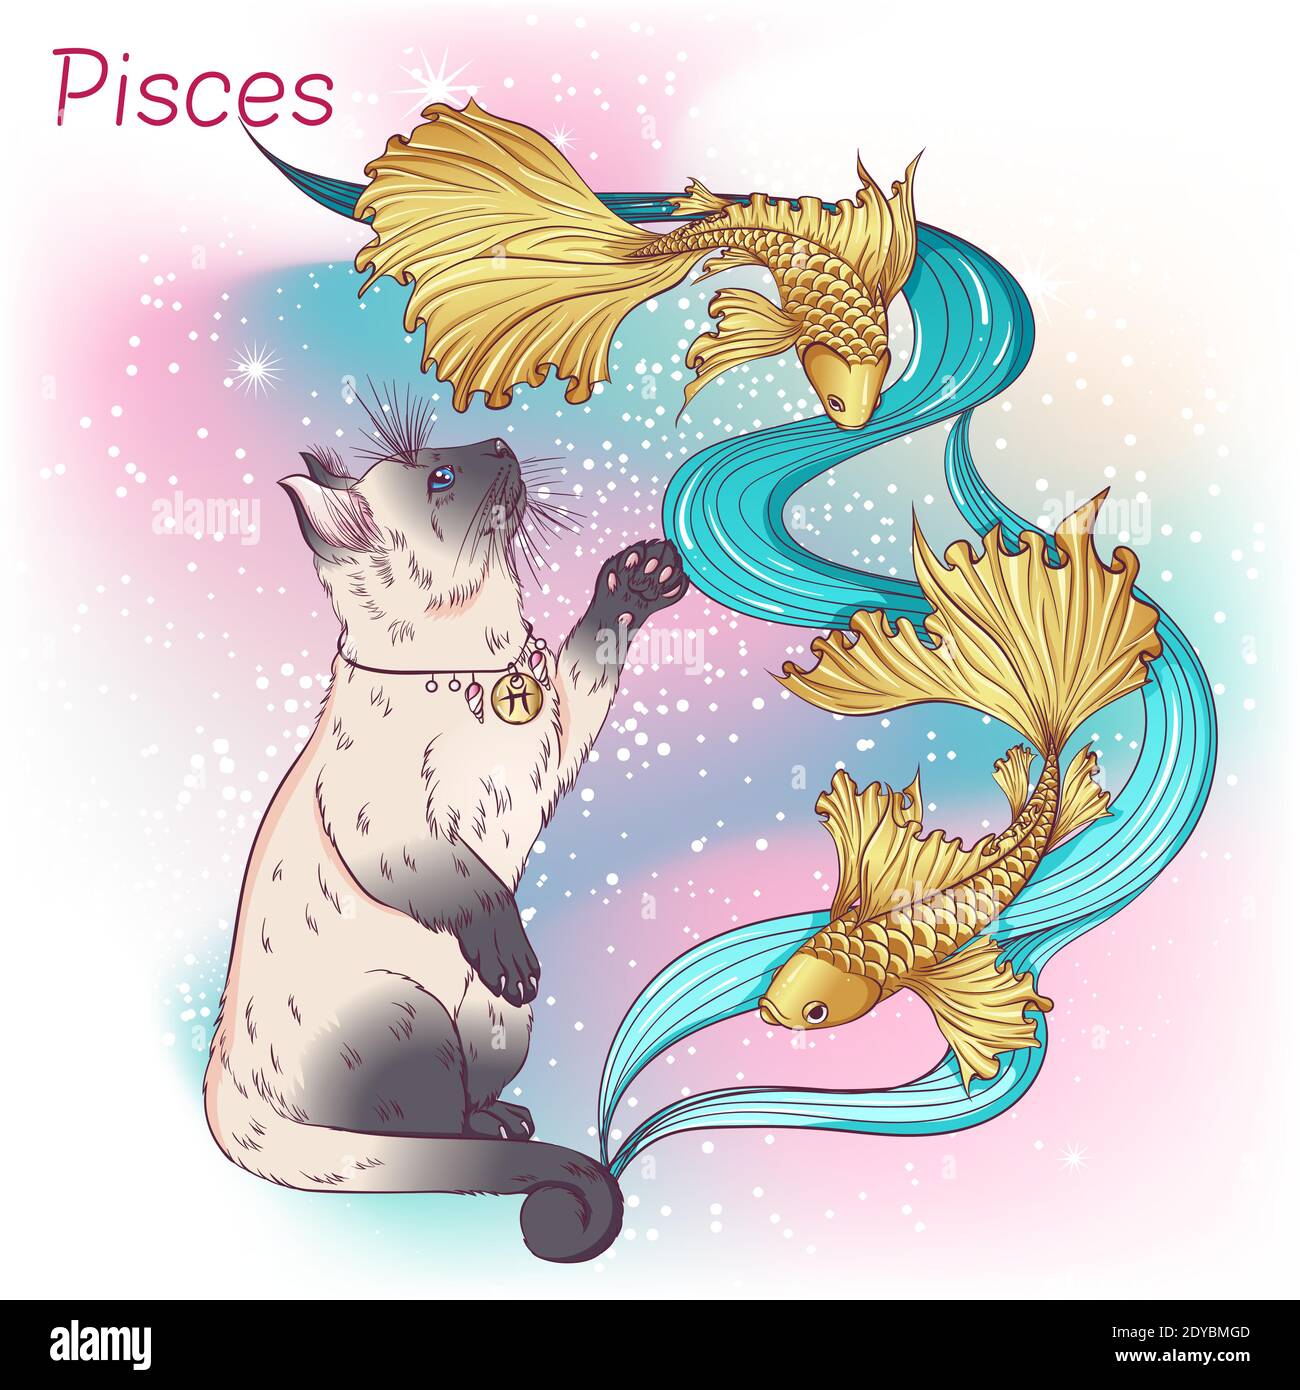 Zodiac. Vector illustration of the astrological sign of Pisces as a Siamese or Thai cat breed standing on two hind legs. Astrological horoscope element. Astrology concept art Stock Vector